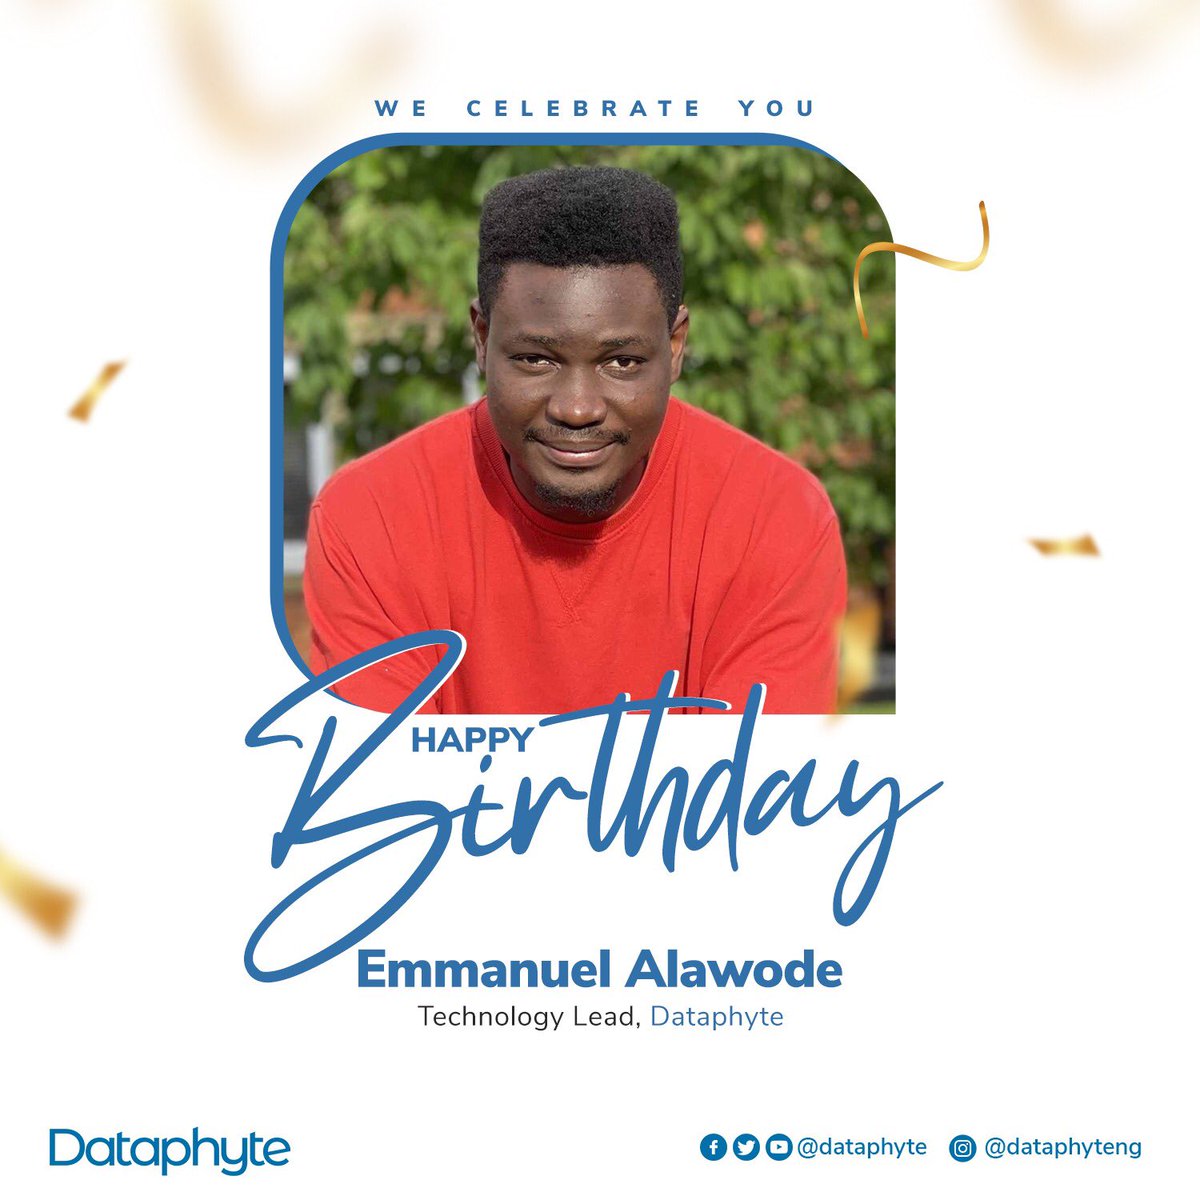 Happy birthday to our Technology Lead, Emmanuel Alawode! A huge thank you for all you do to make our work easier and more efficient. Your expertise and dedication really shine through, and we’re happy to have you here at Dataphyte. Here’s to another year of success, growth,